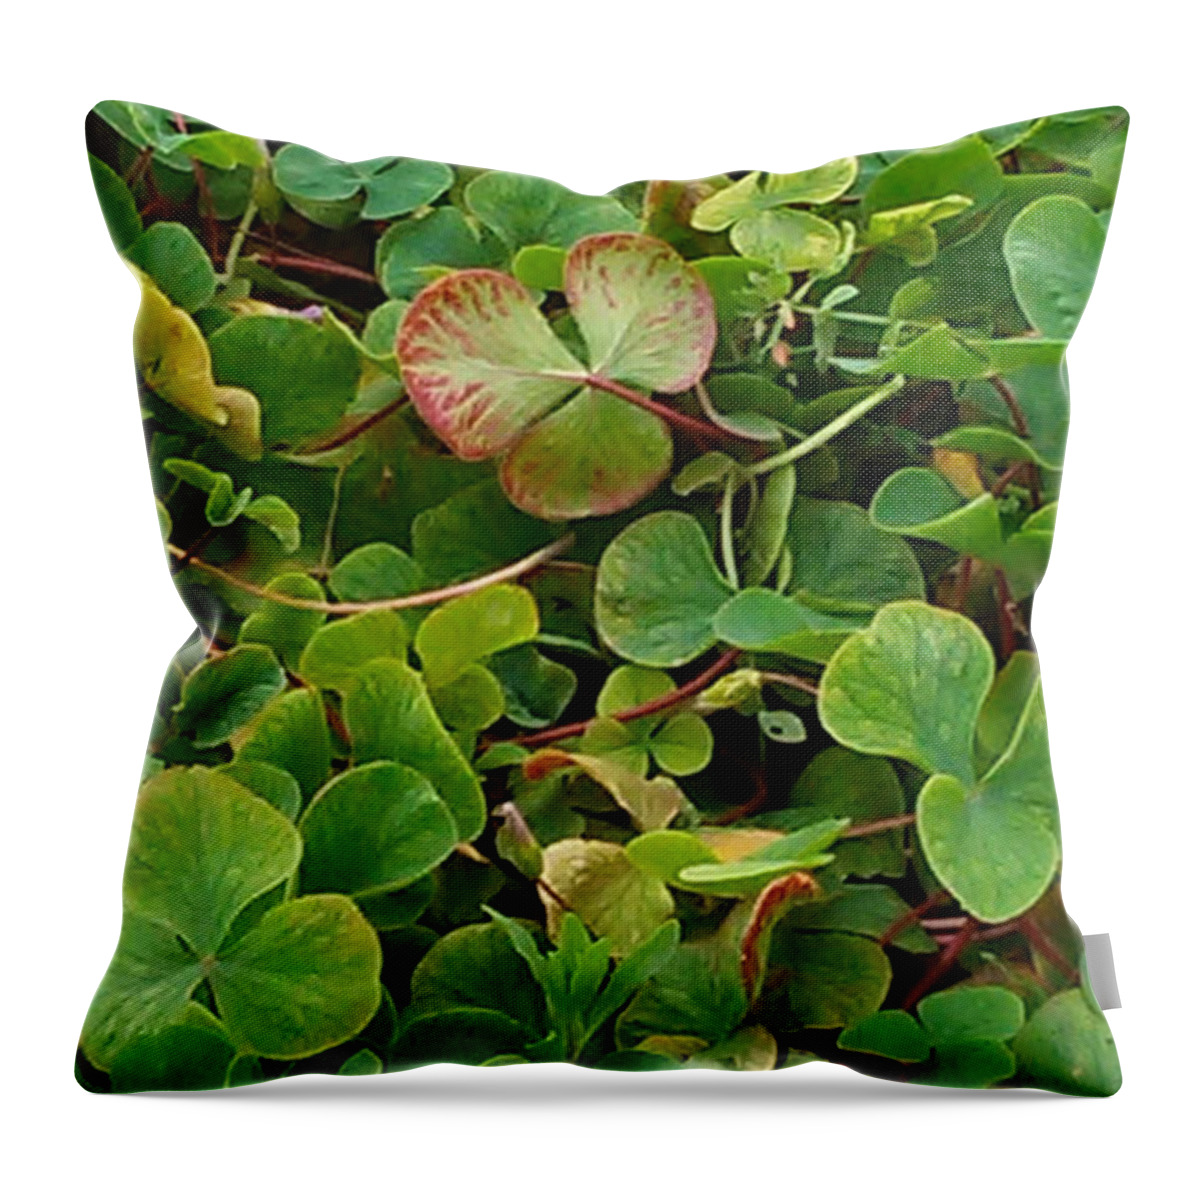 Shamrock Throw Pillow featuring the photograph Lucky Charms by Colleen Cornelius